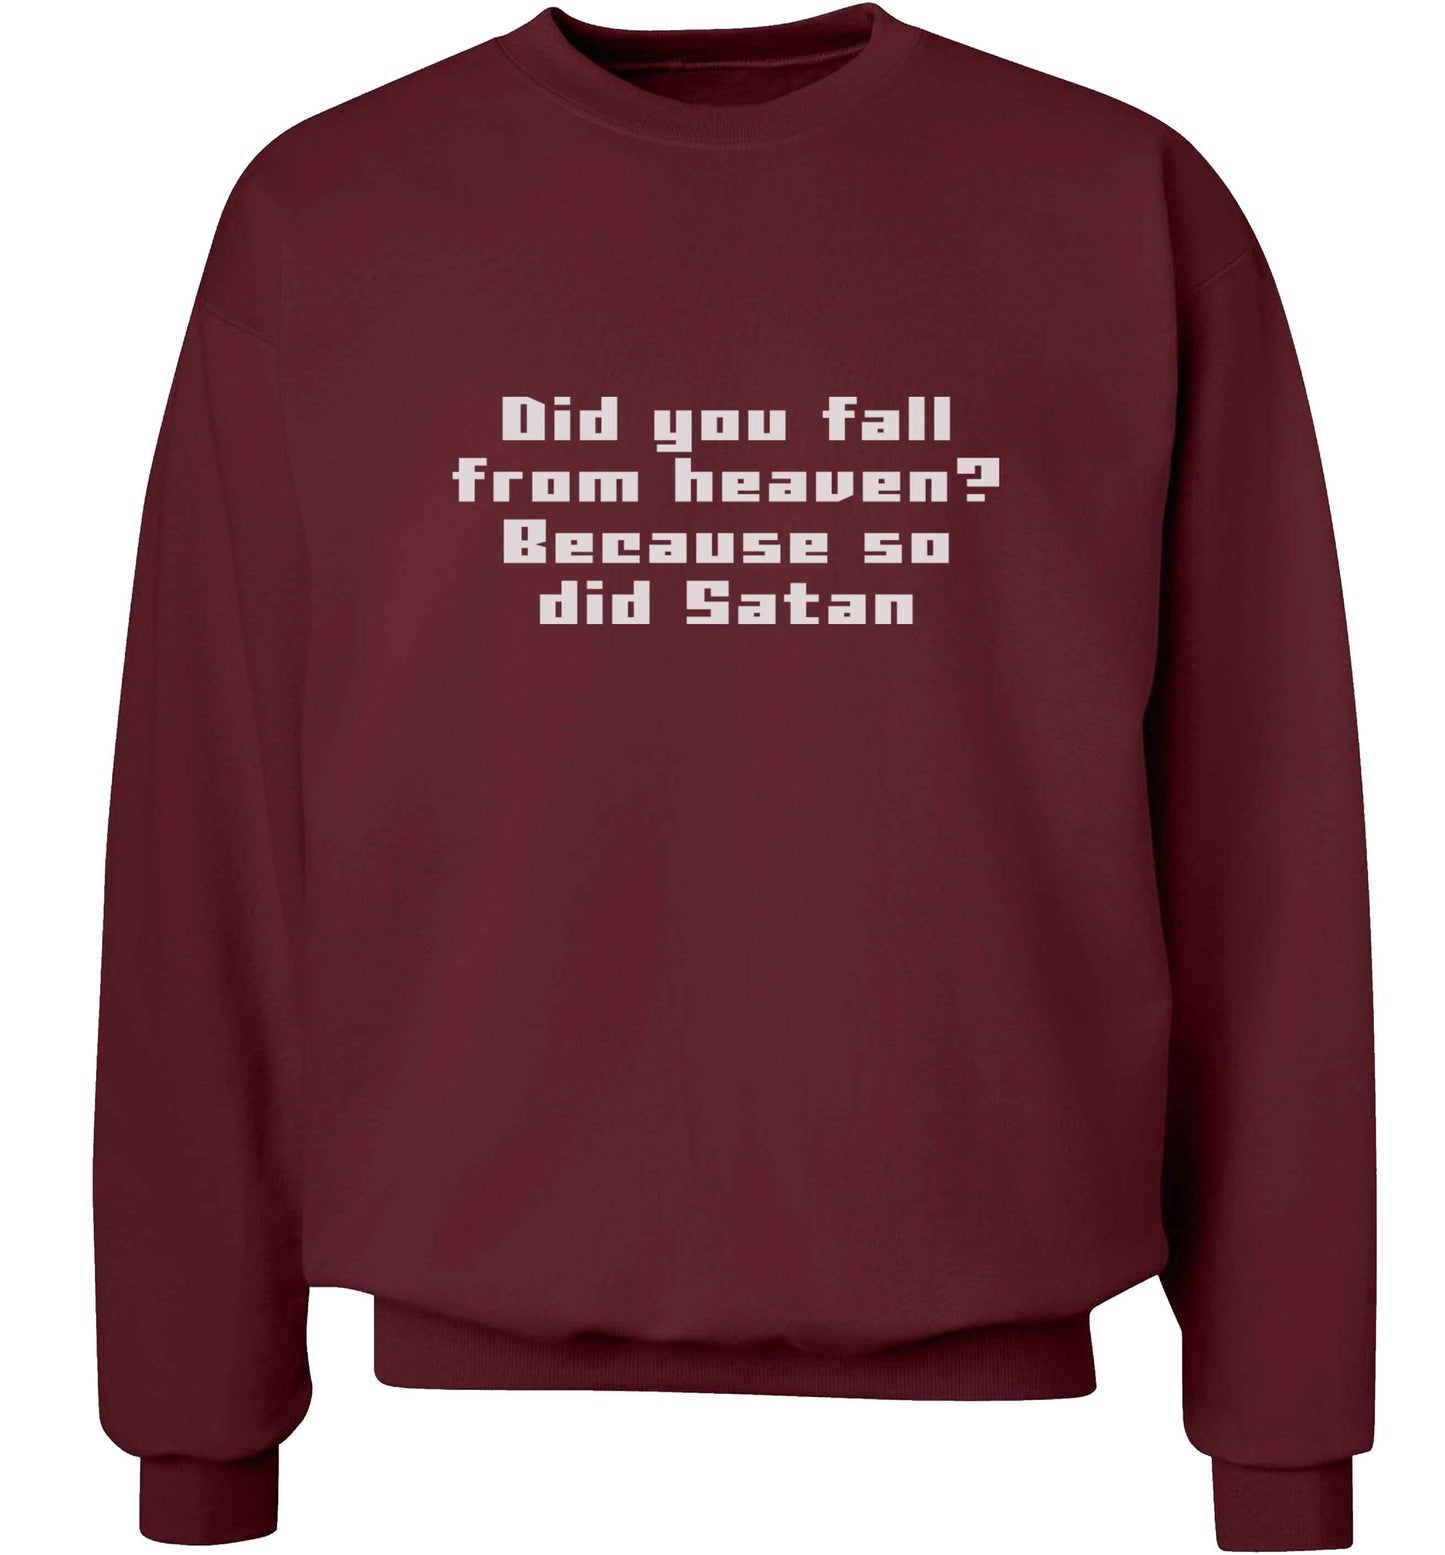 Did you fall from Heaven because so did Satan adult's unisex maroon sweater 2XL